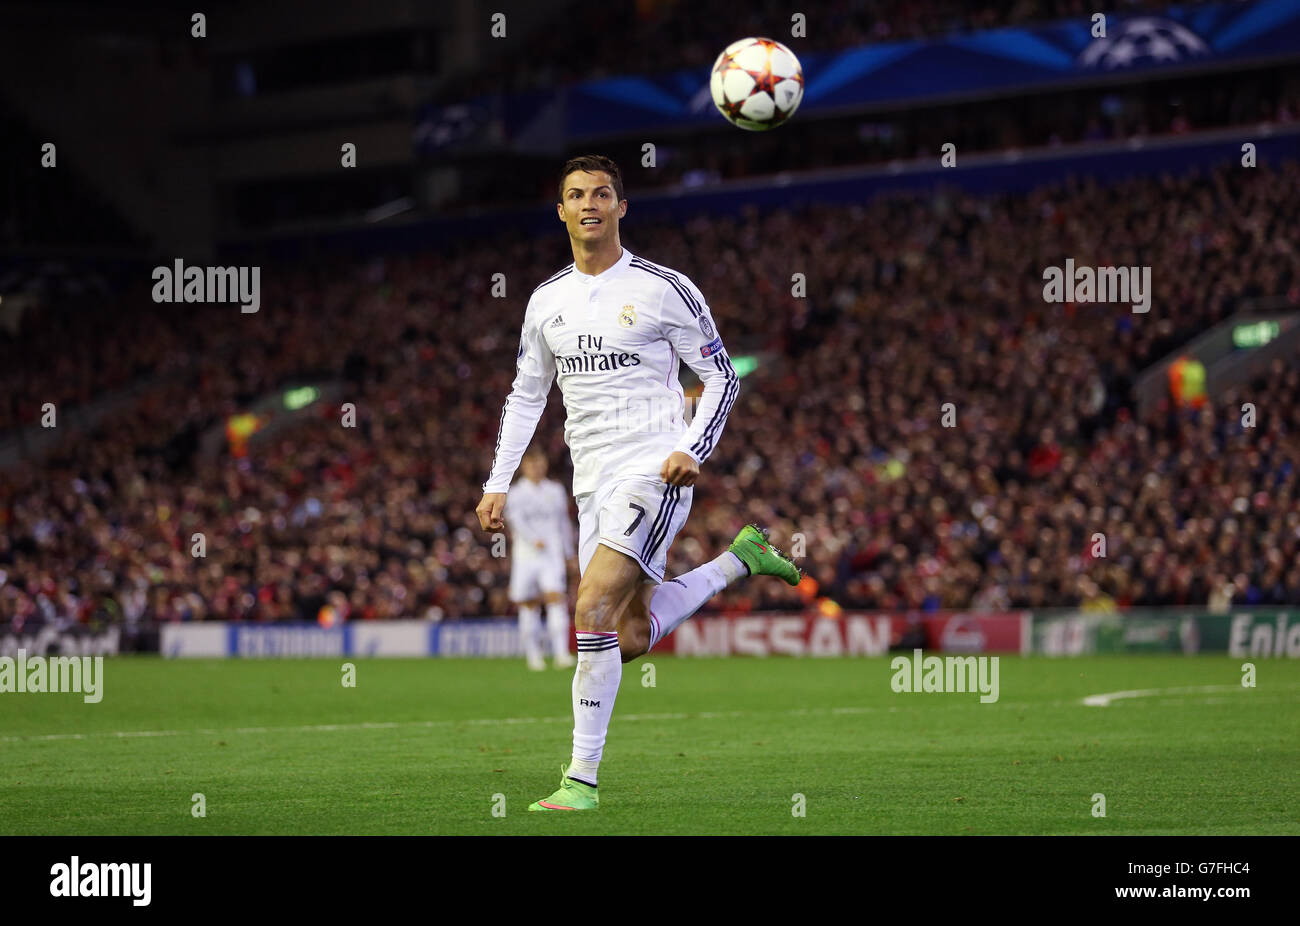 Football - Ligue des champions de l'UEFA - Groupe B - Liverpool / Real Madrid - Anfield.Cristiano Ronaldo du Real Madrid lors du match de la Ligue des champions de l'UEFA à Anfield, Liverpool. Banque D'Images